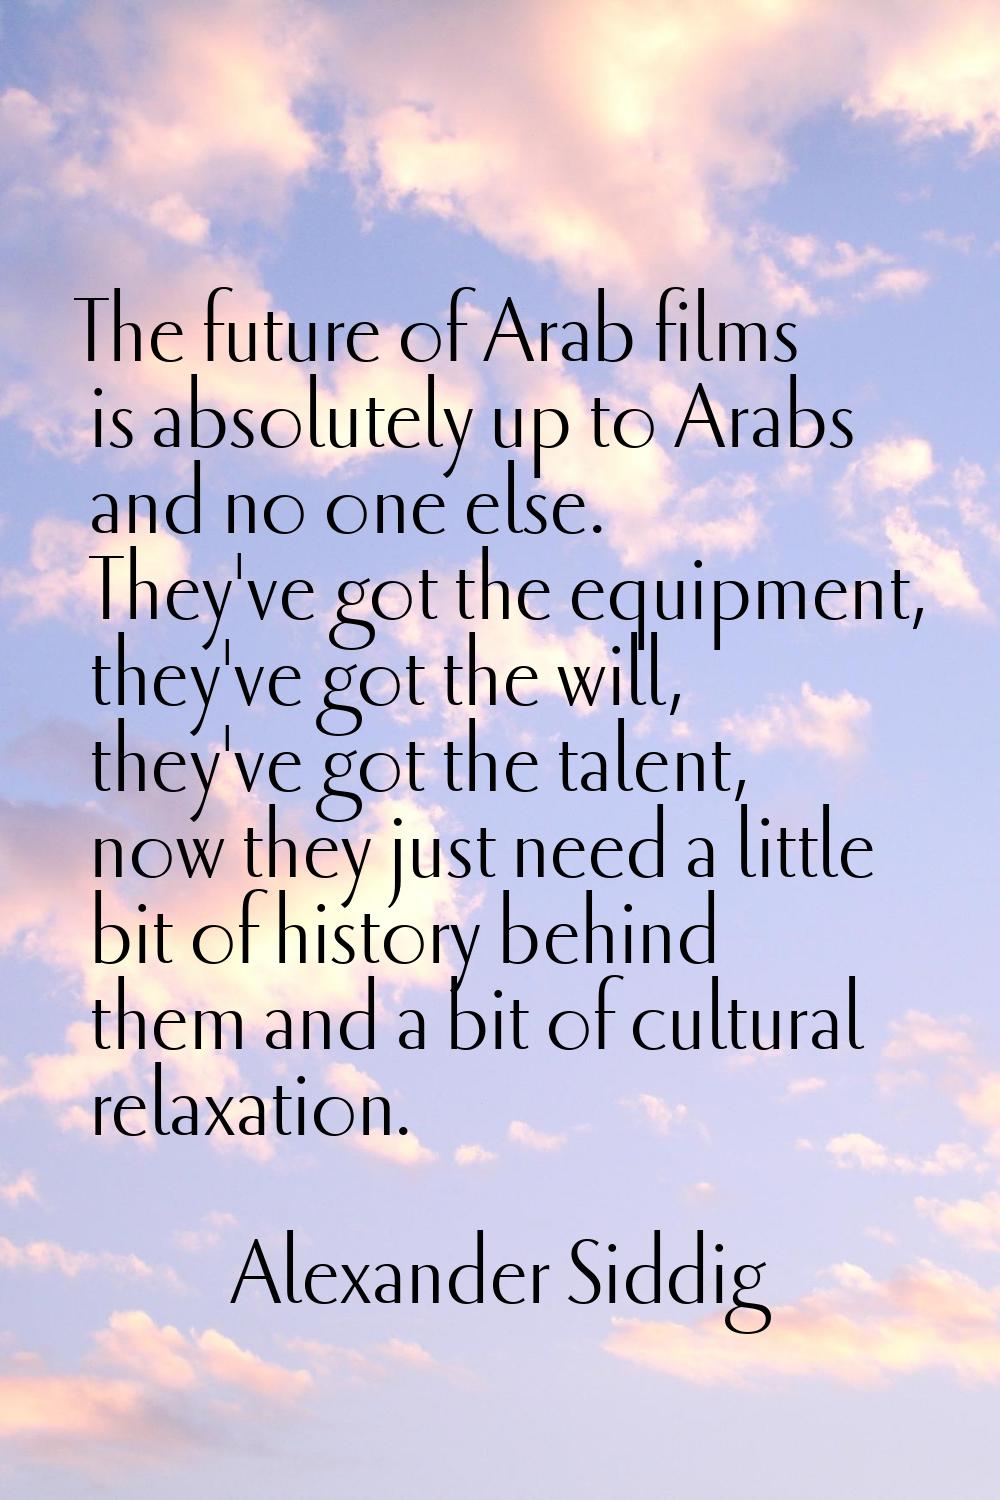 The future of Arab films is absolutely up to Arabs and no one else. They've got the equipment, they